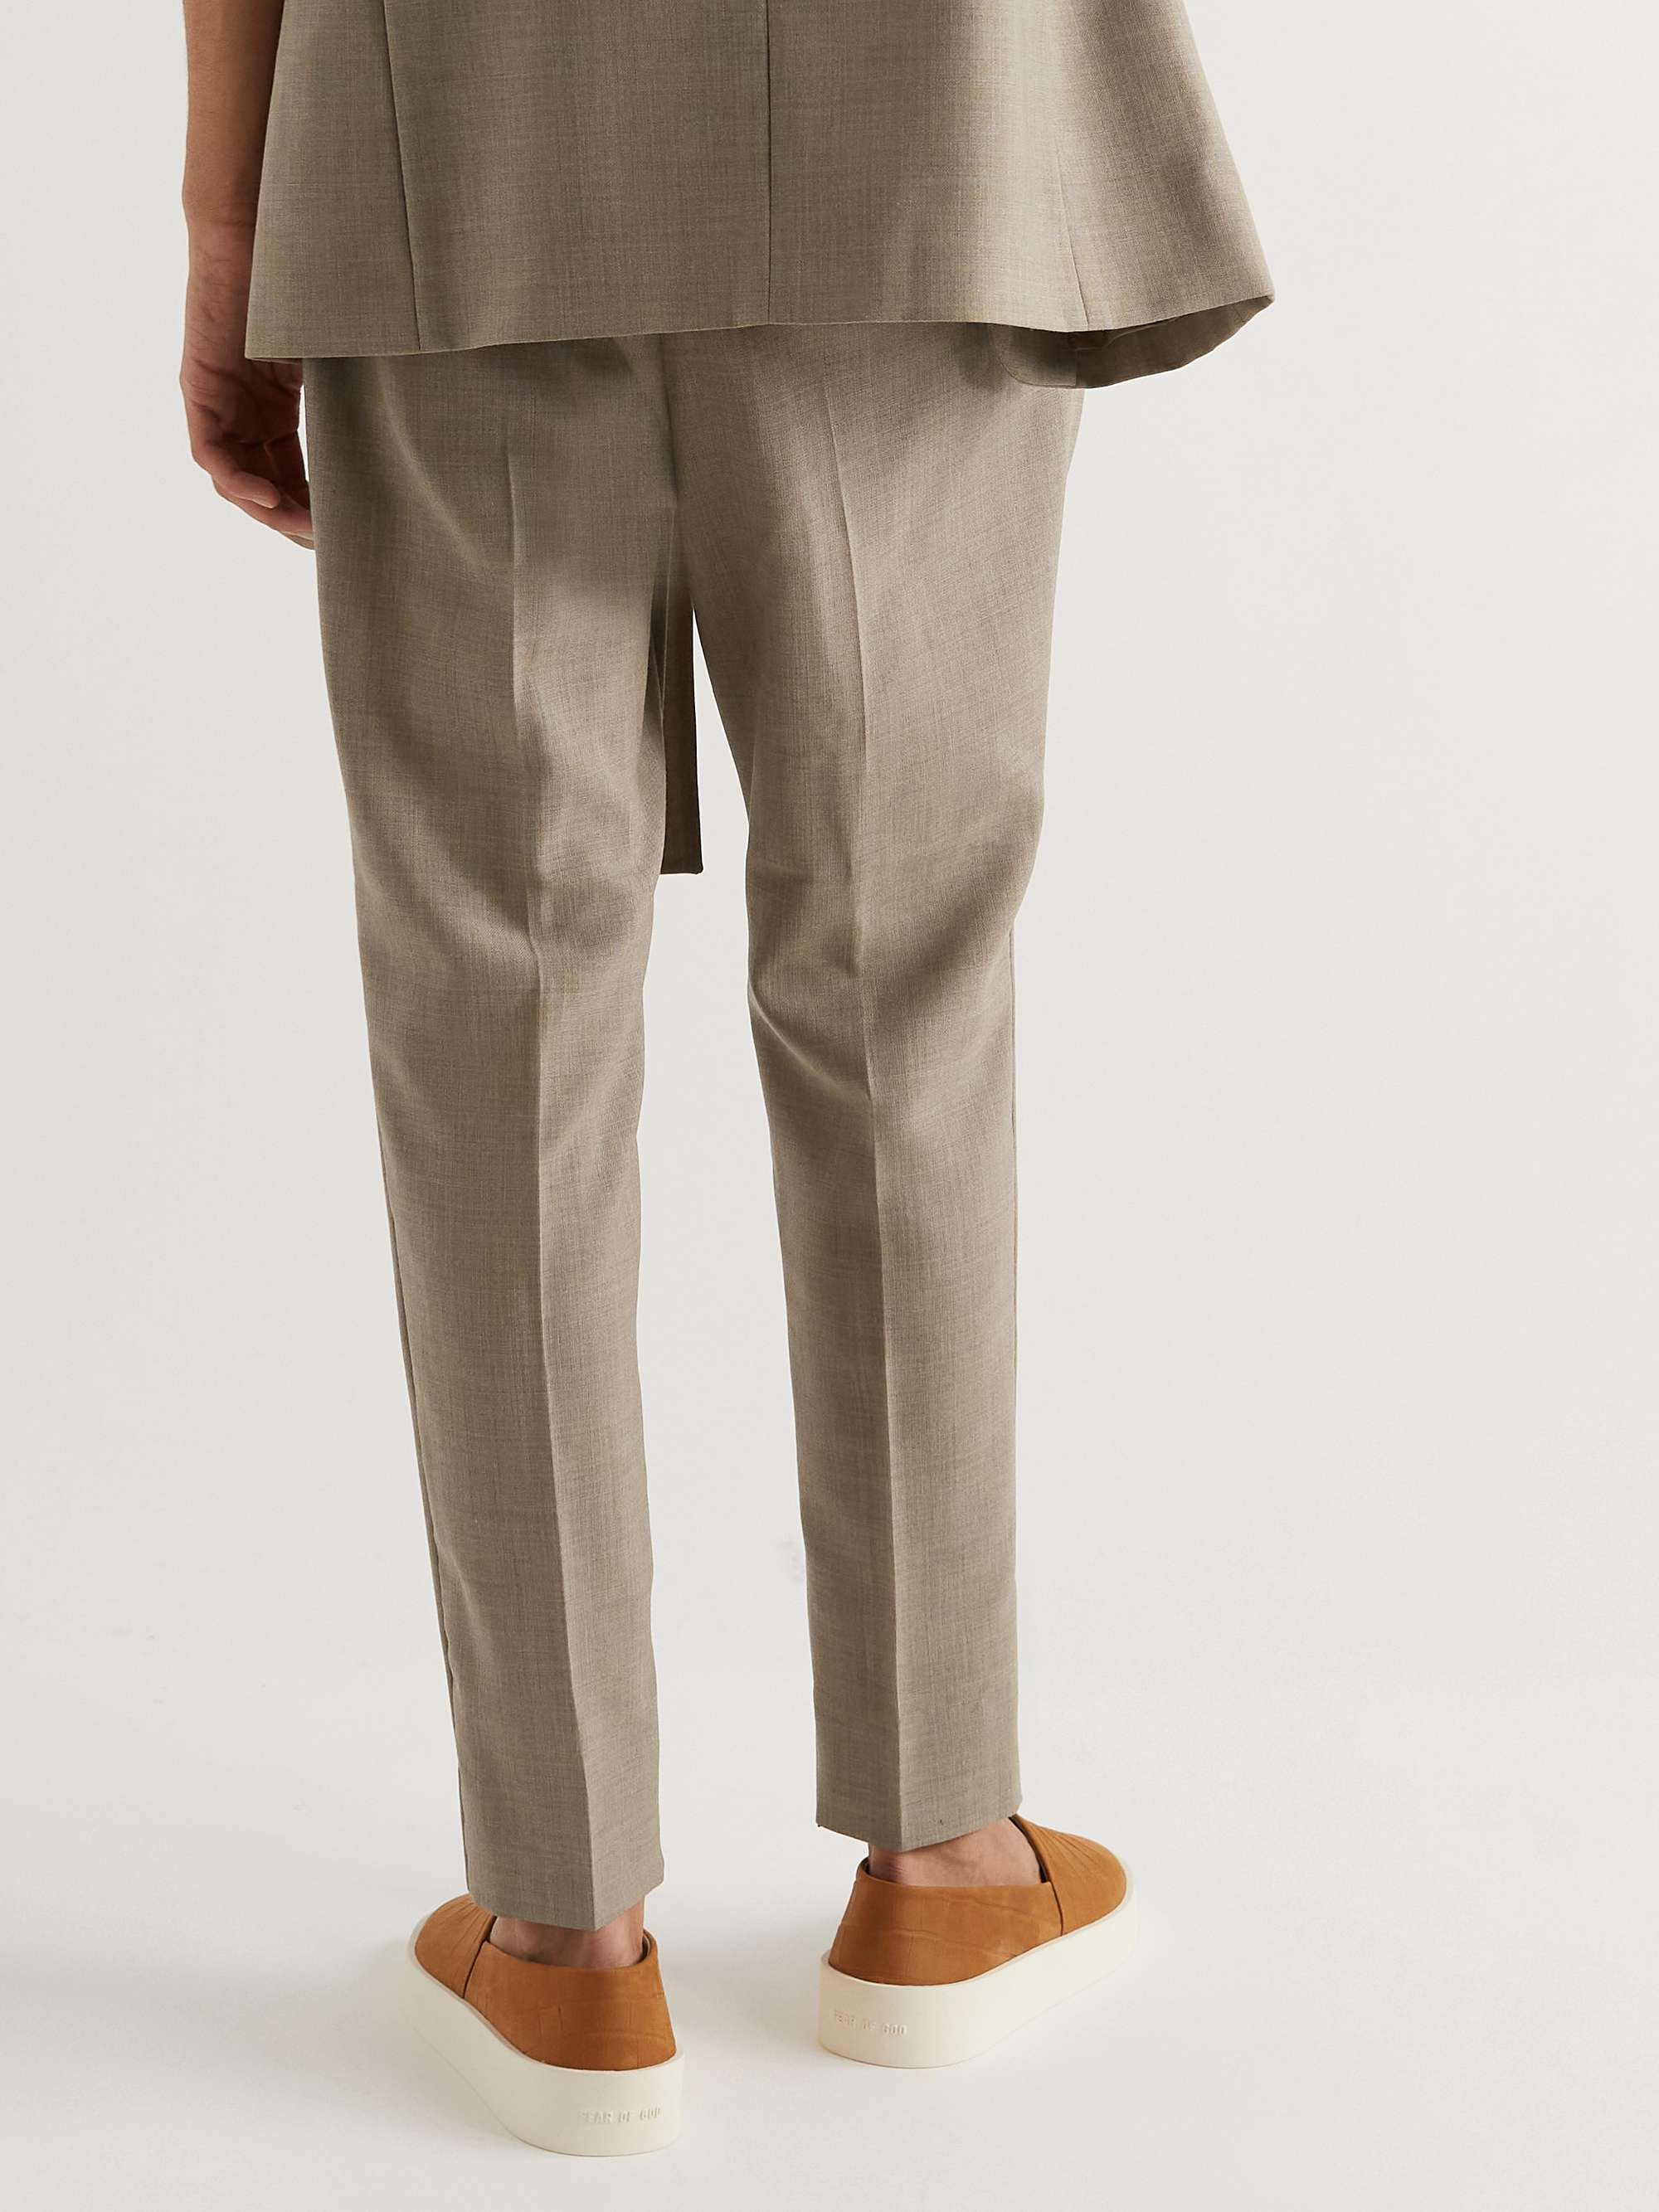 FEAR OF GOD Tapered Pleated Belted Wool Trousers